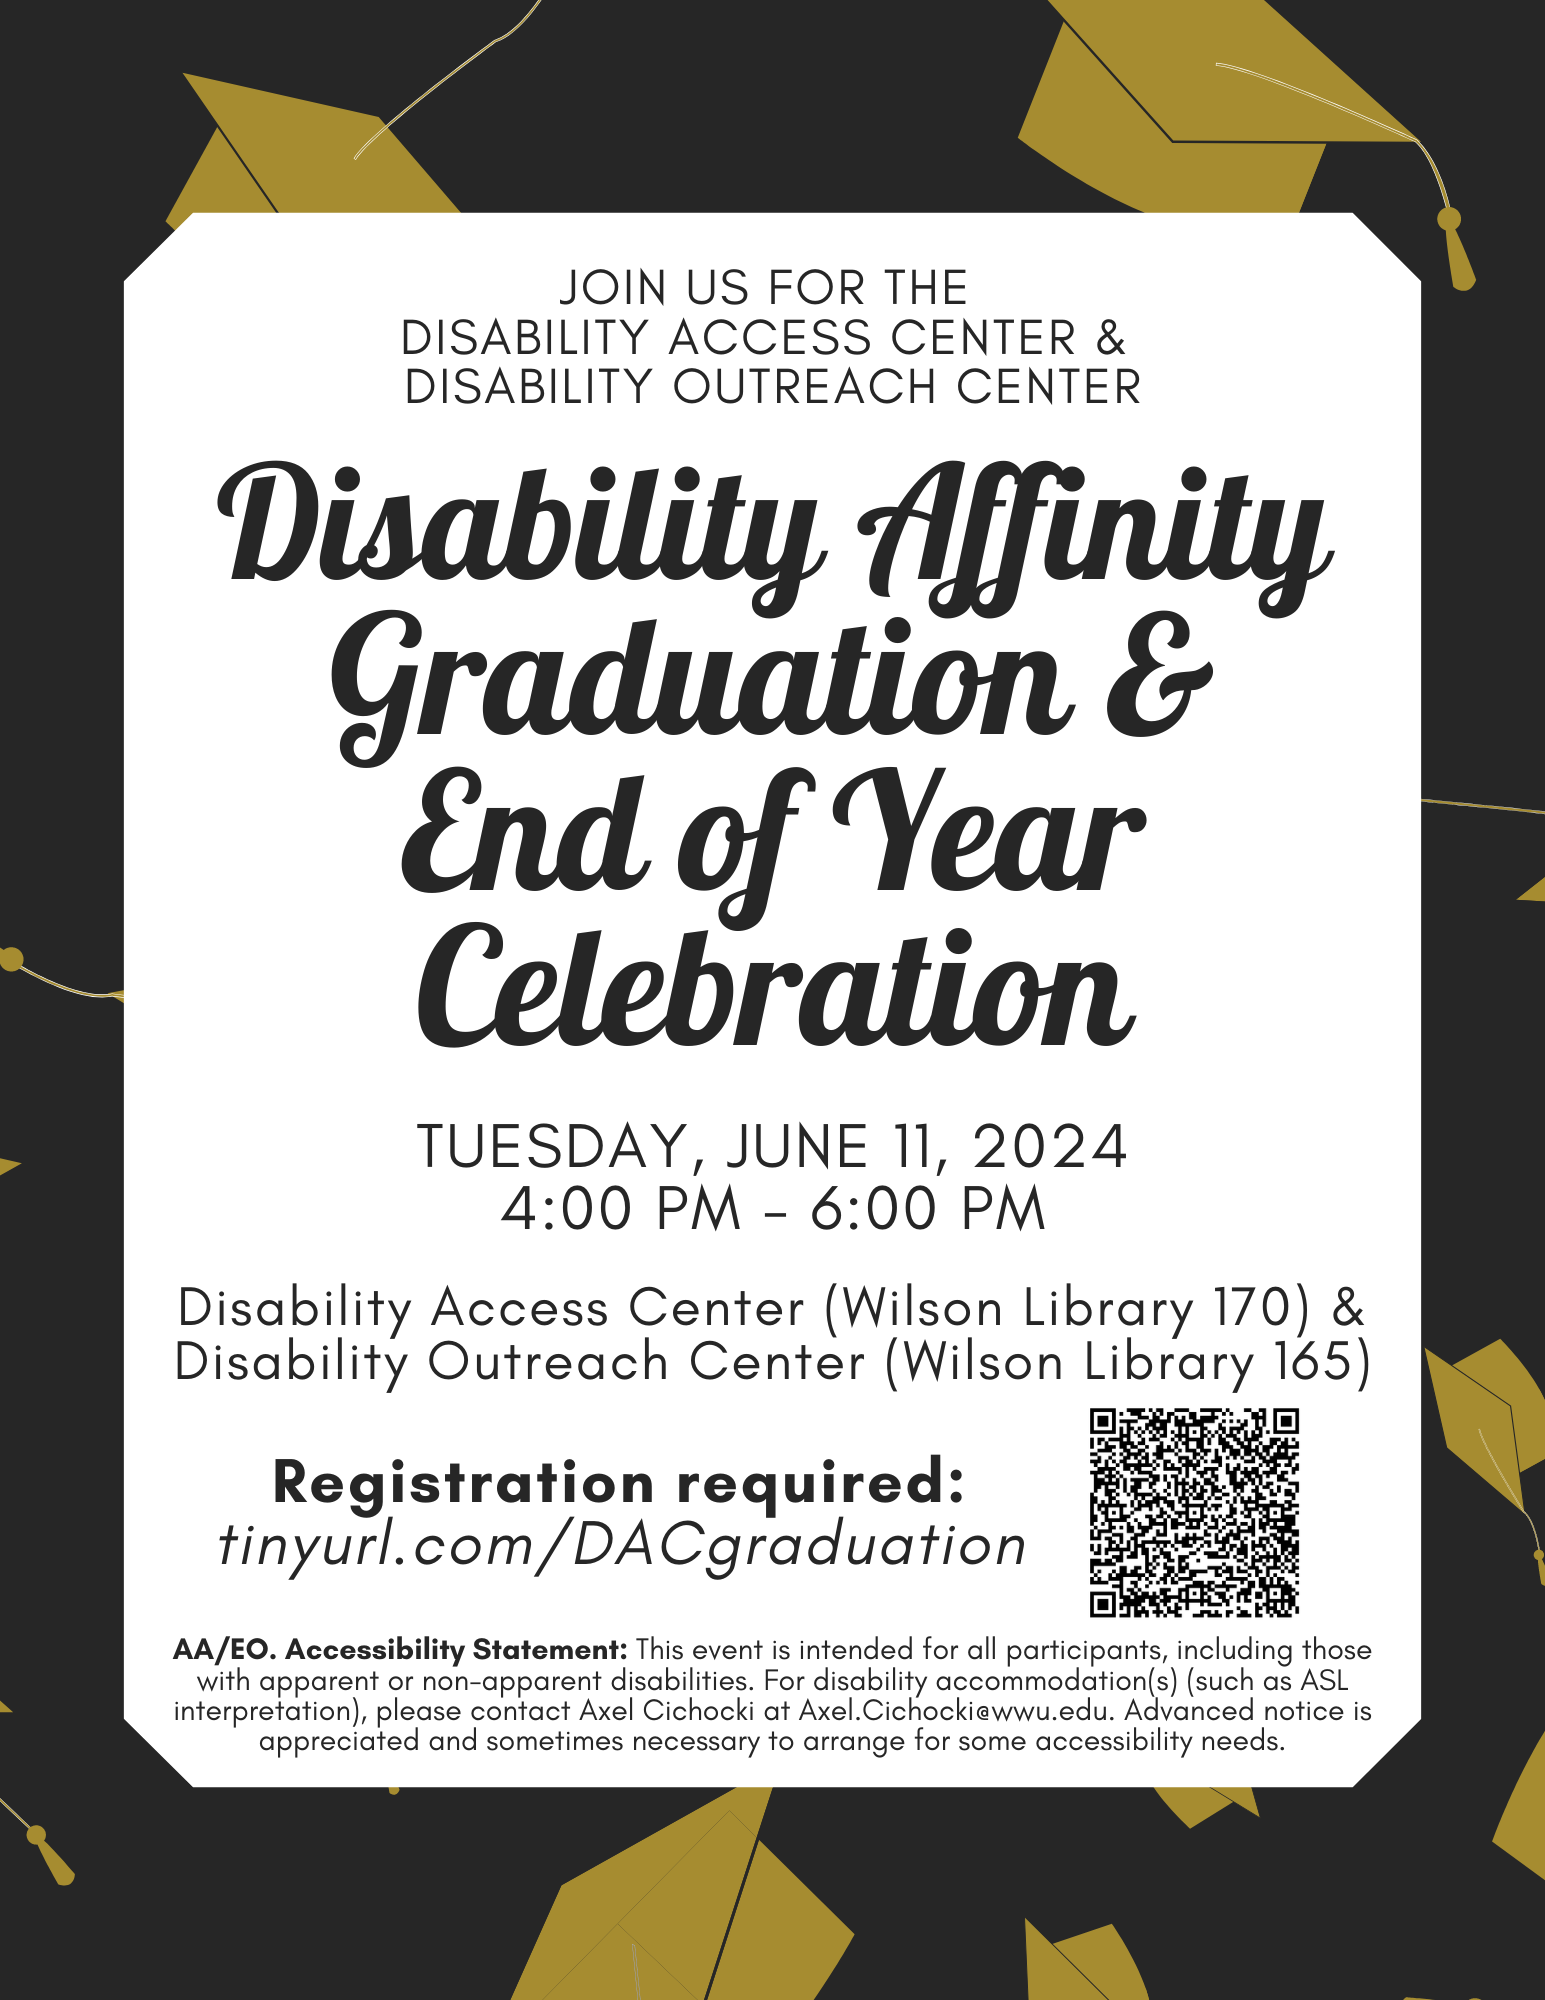 decorative flyer advertising the DAC and DOC Disability Affinity Graduation and End of Year Celebration